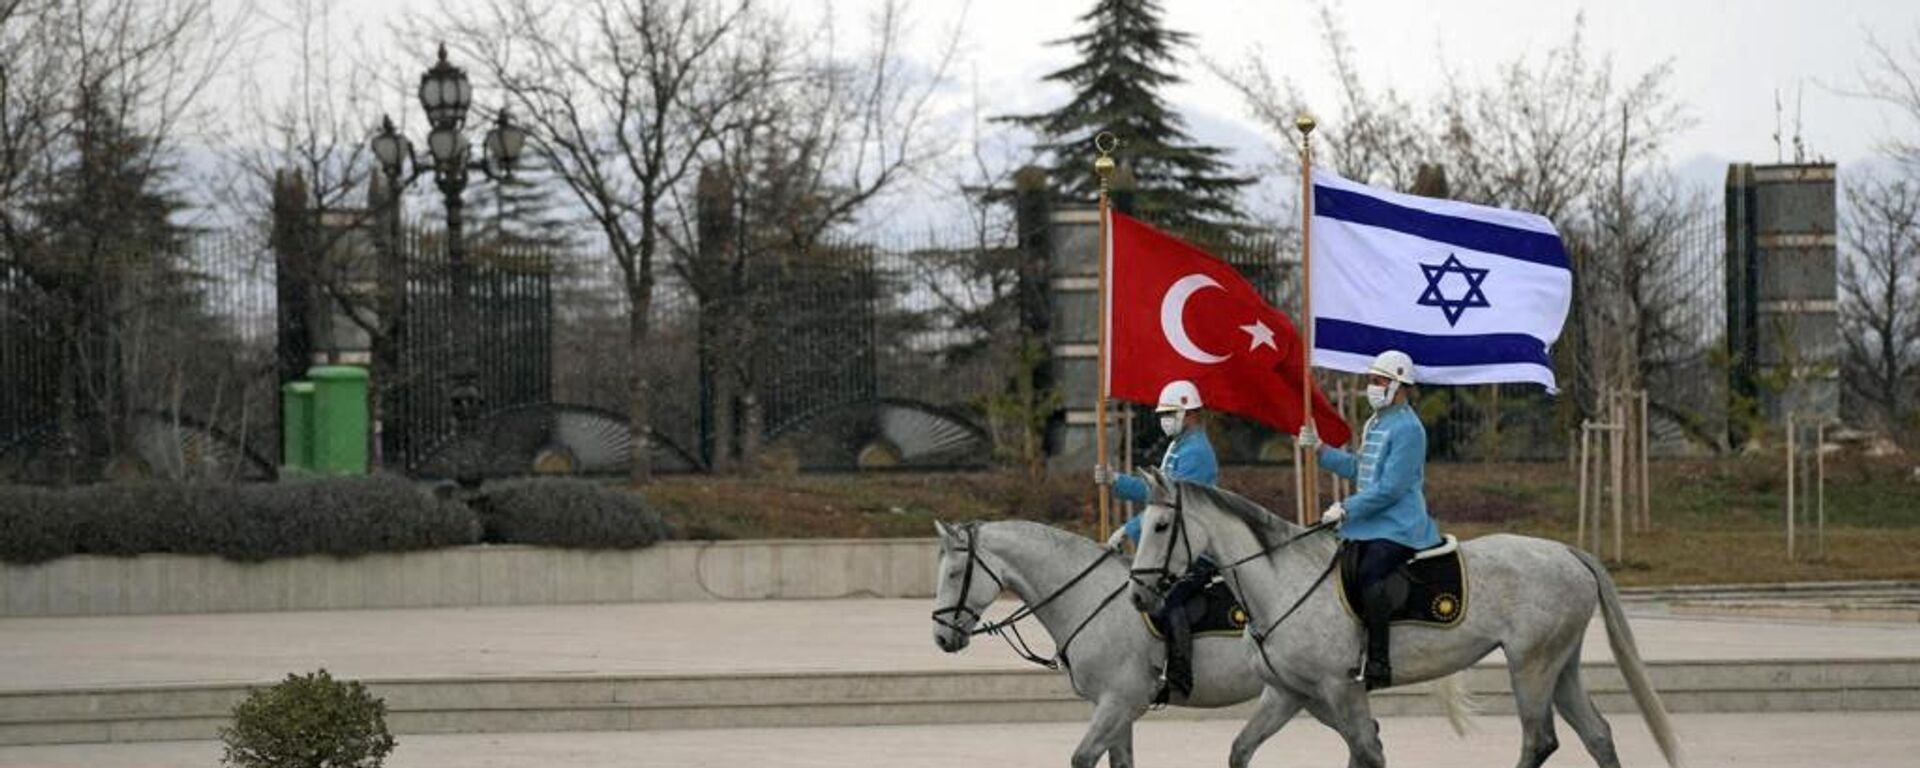 A handout picture obtained from the Israeli Government Press Office (GPO) on March 9, 2022, shows Turkish cavalry guards waving the Israeli (R) and Turkish flags, to welcome the Israeli president in the capital Ankara. - Israel's president Isaac Herzog landed in Ankara today on a trip aimed at repairing fractured ties with Turkey, in the first visit to the country by an Israeli head of state since 2007. (Photo by GPO / AFP) / RESTRICTED TO EDITORIAL USE - MANDATORY CREDIT AFP PHOTO /  GPO   - Sputnik International, 1920, 23.06.2022